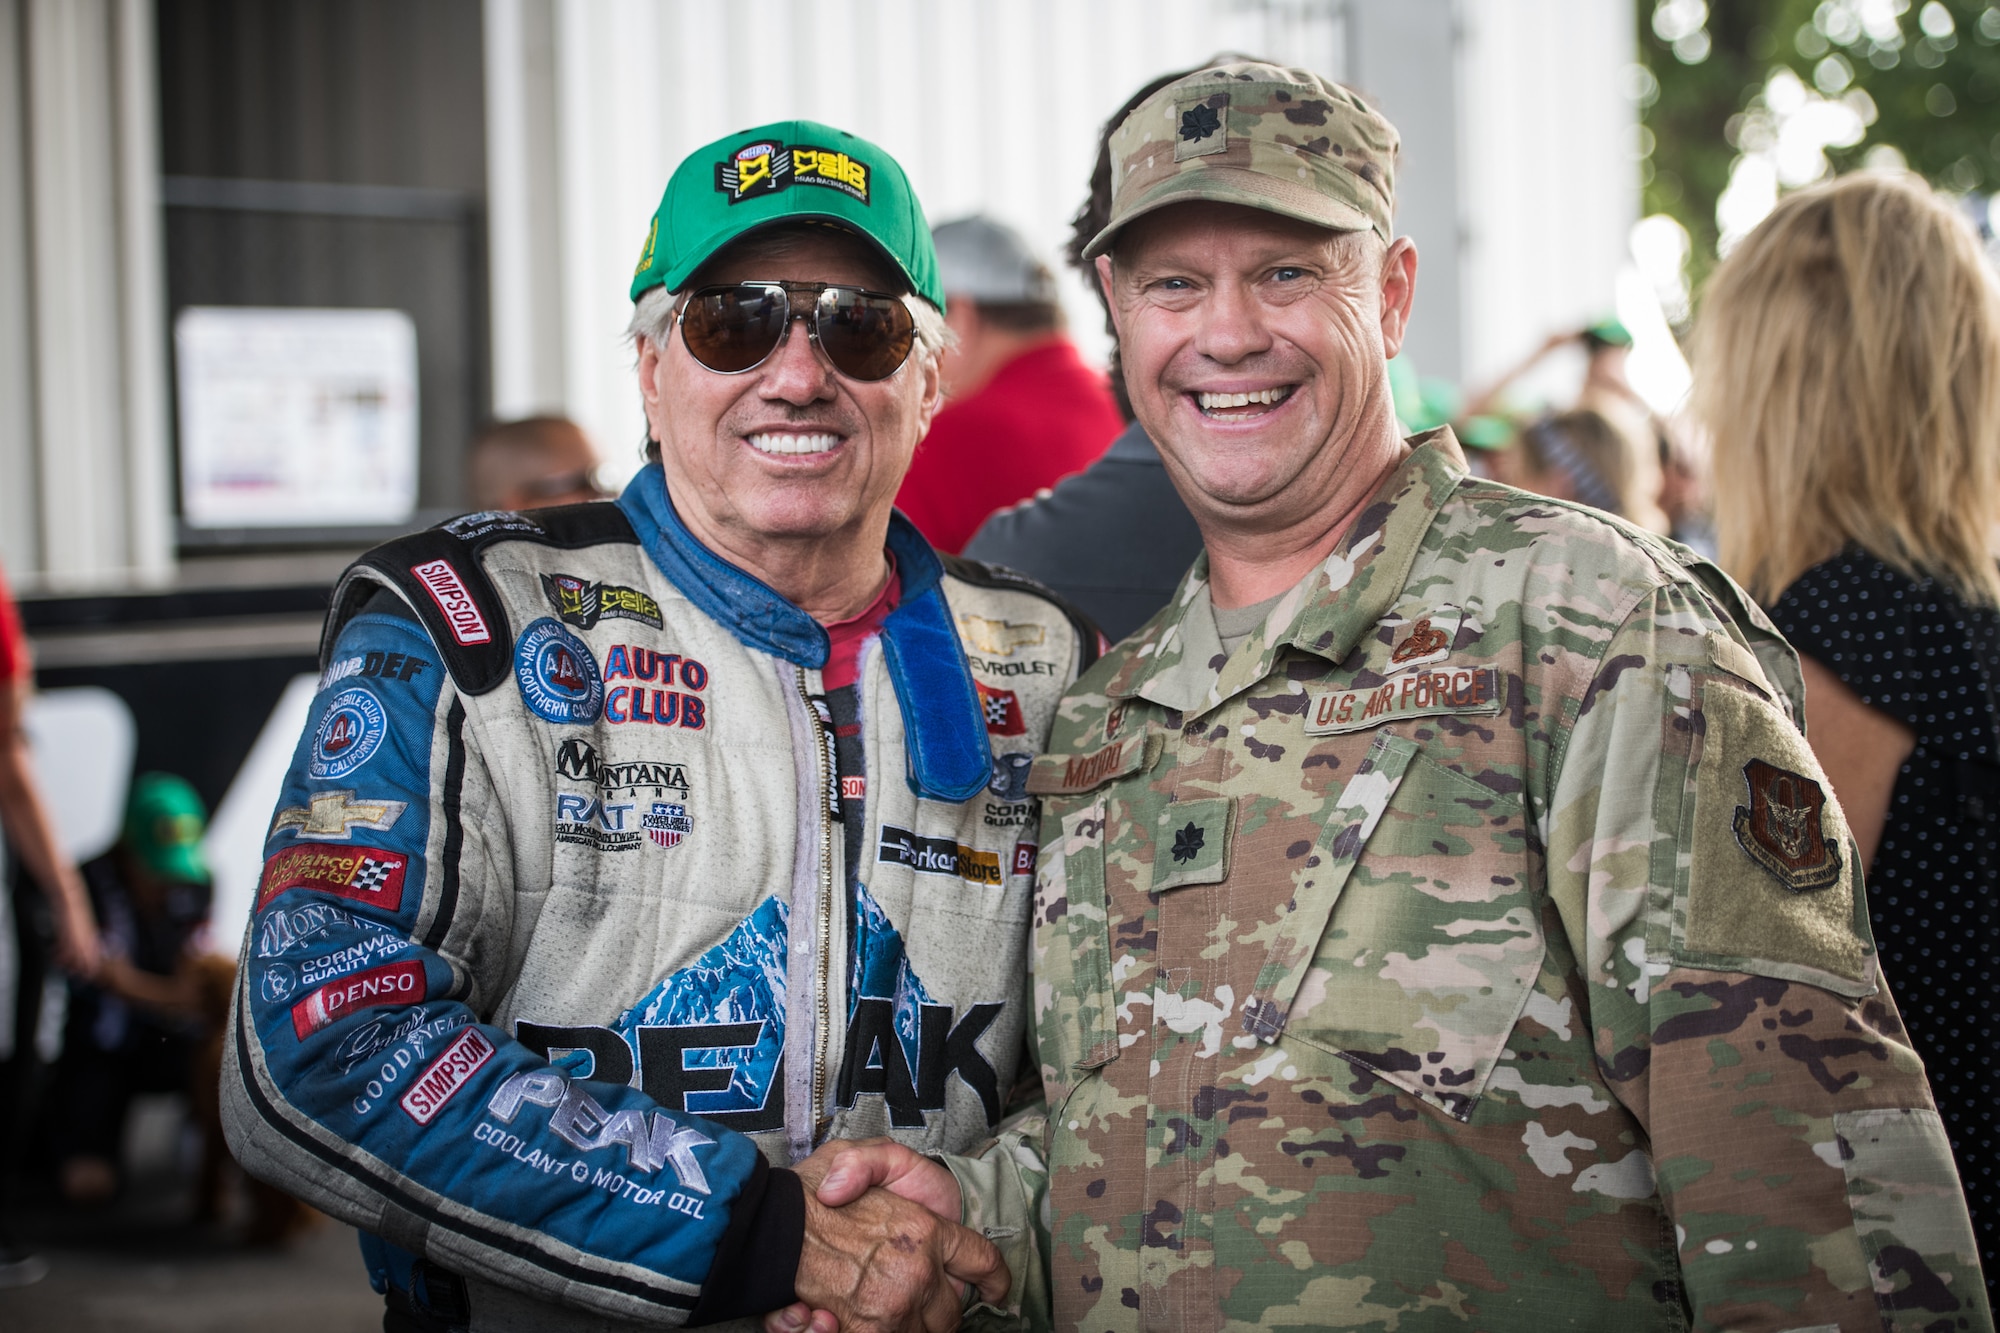 Lt. Col. William McLeod, 932nd Maintenance Group commander,  poses for a photo with a National Hot Rod Association race car driver just before the opening ceremony, Sept. 29, 2019, World Wide Technology Raceway at Gateway Motorsports Madison Illinois. McLeod was honored as a special guest for the day and presented a NHRA challenge coin. (U.S. Air Force photo by Master Sgt. Christopher Parr)